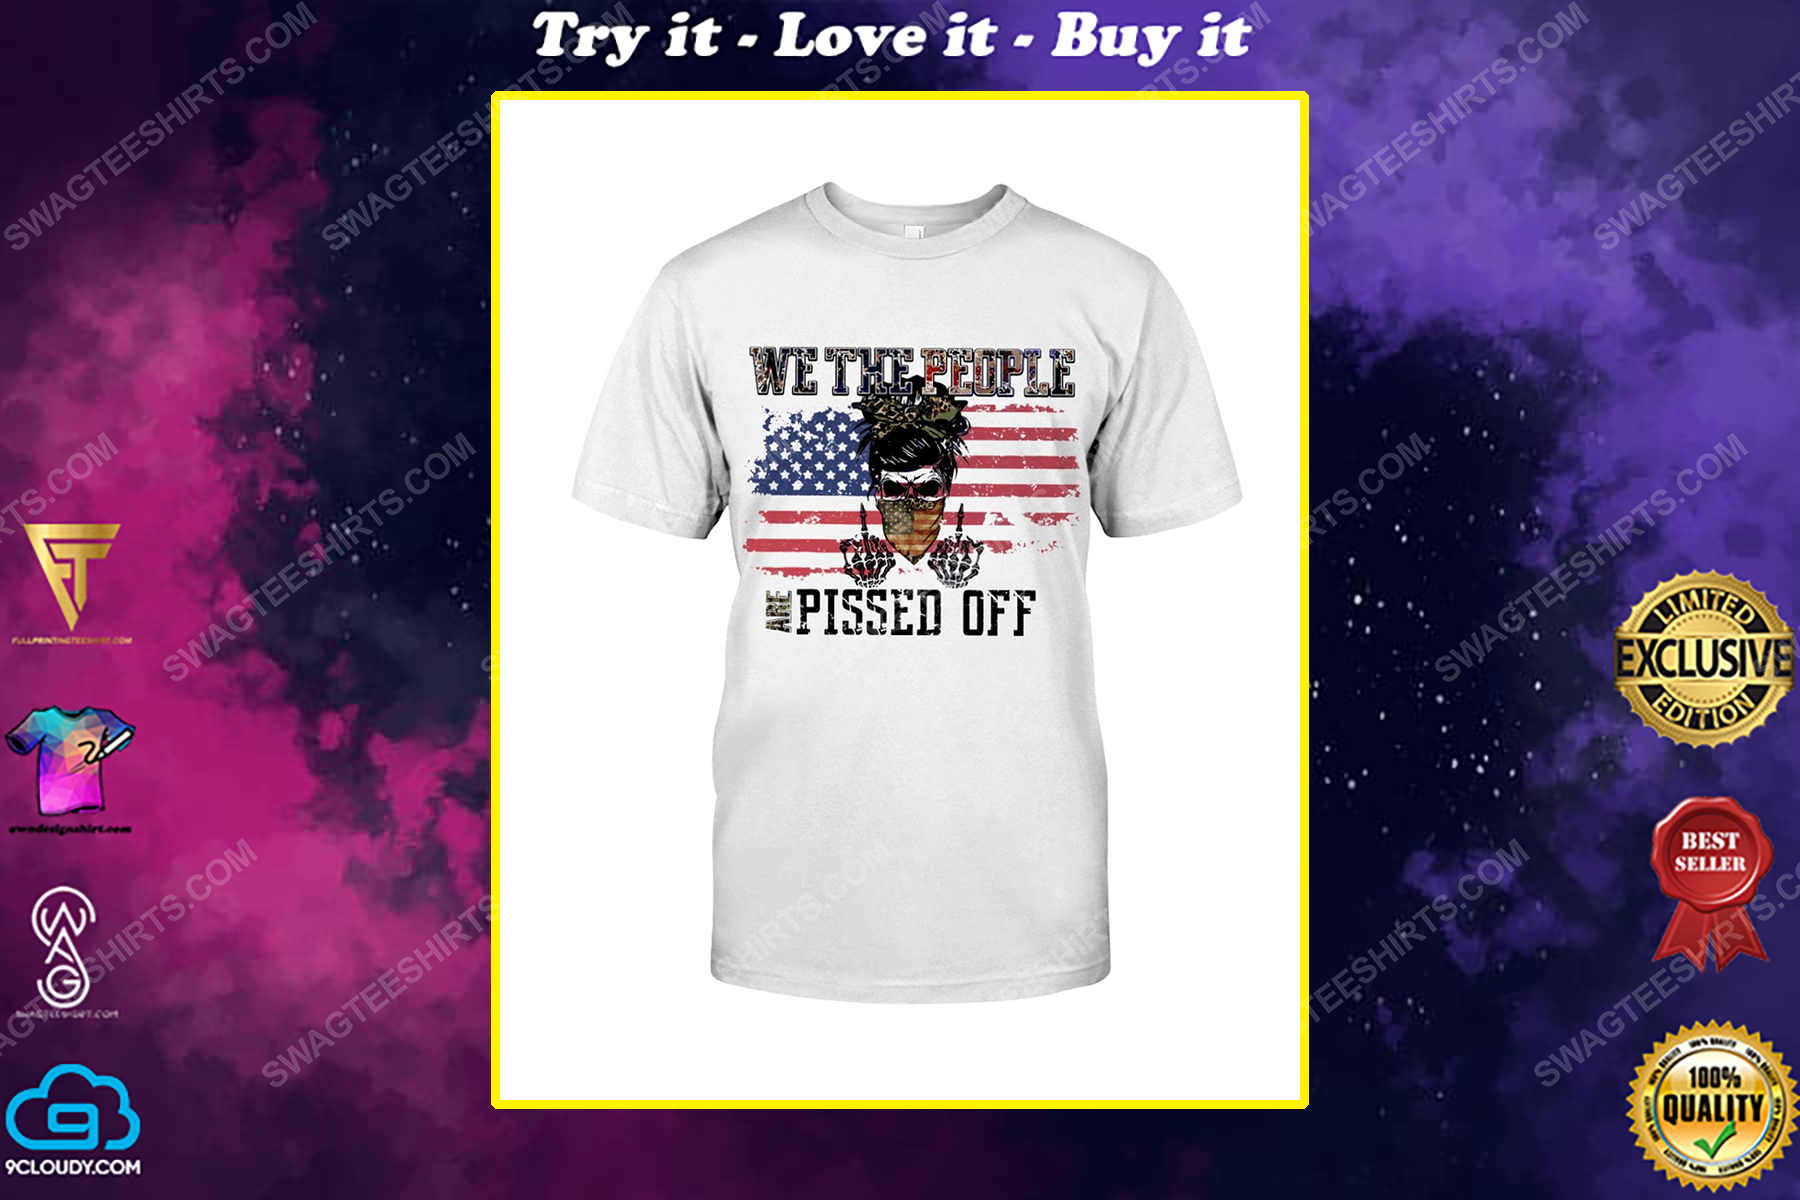 We the people are pissed off fight for democracy political shirt